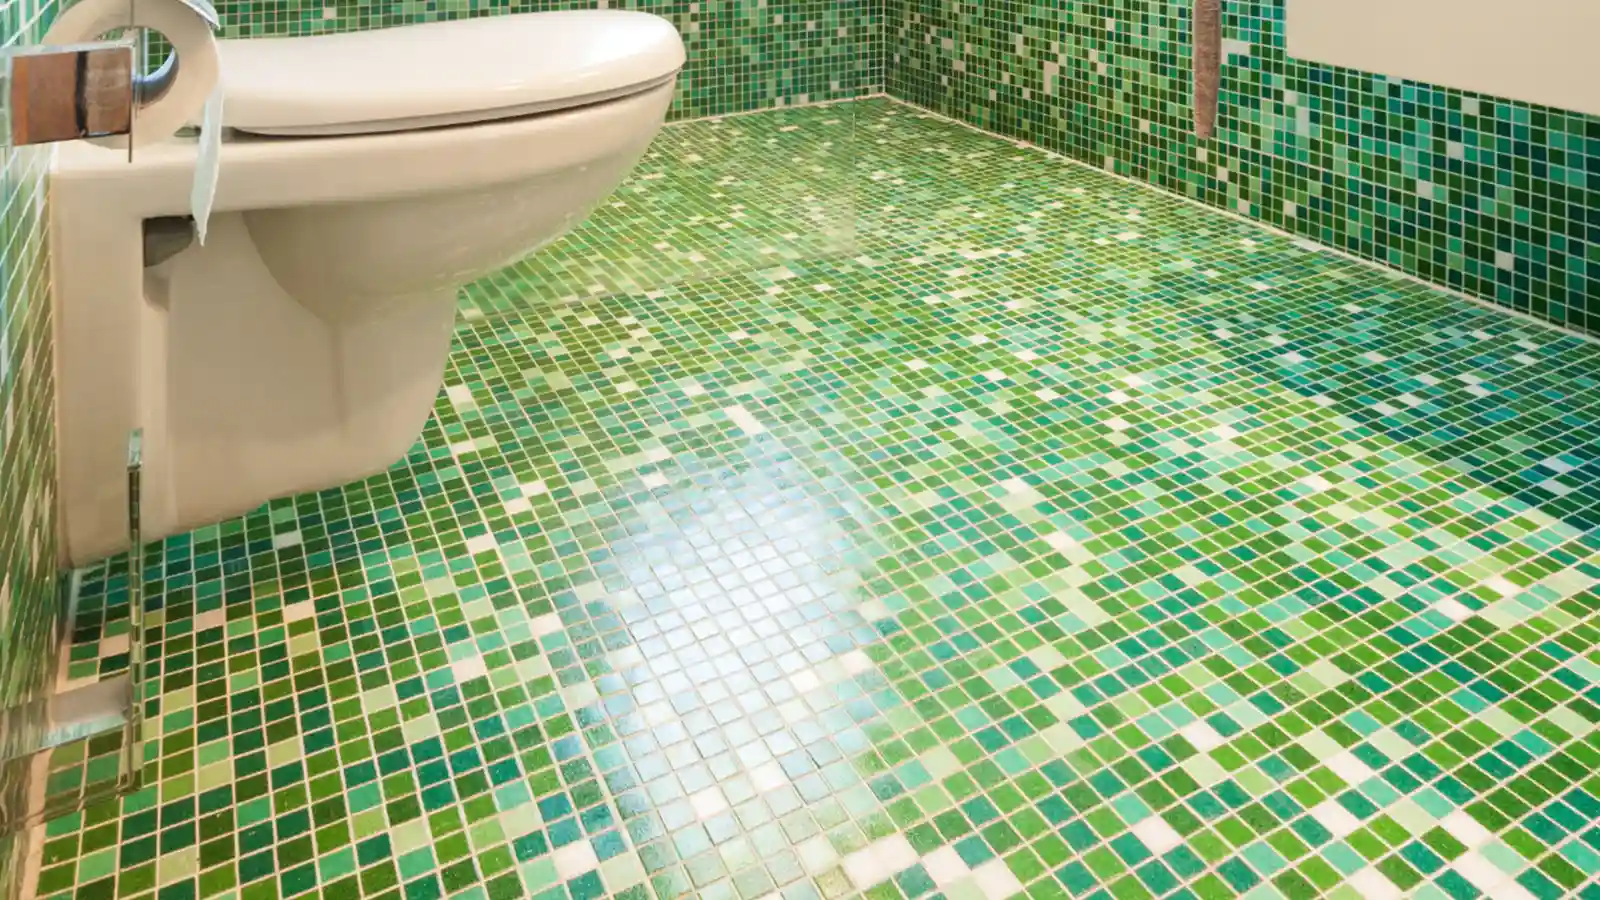 Olive green bathroom decor ideas: A green tiled bathroom with a toilet and sink.